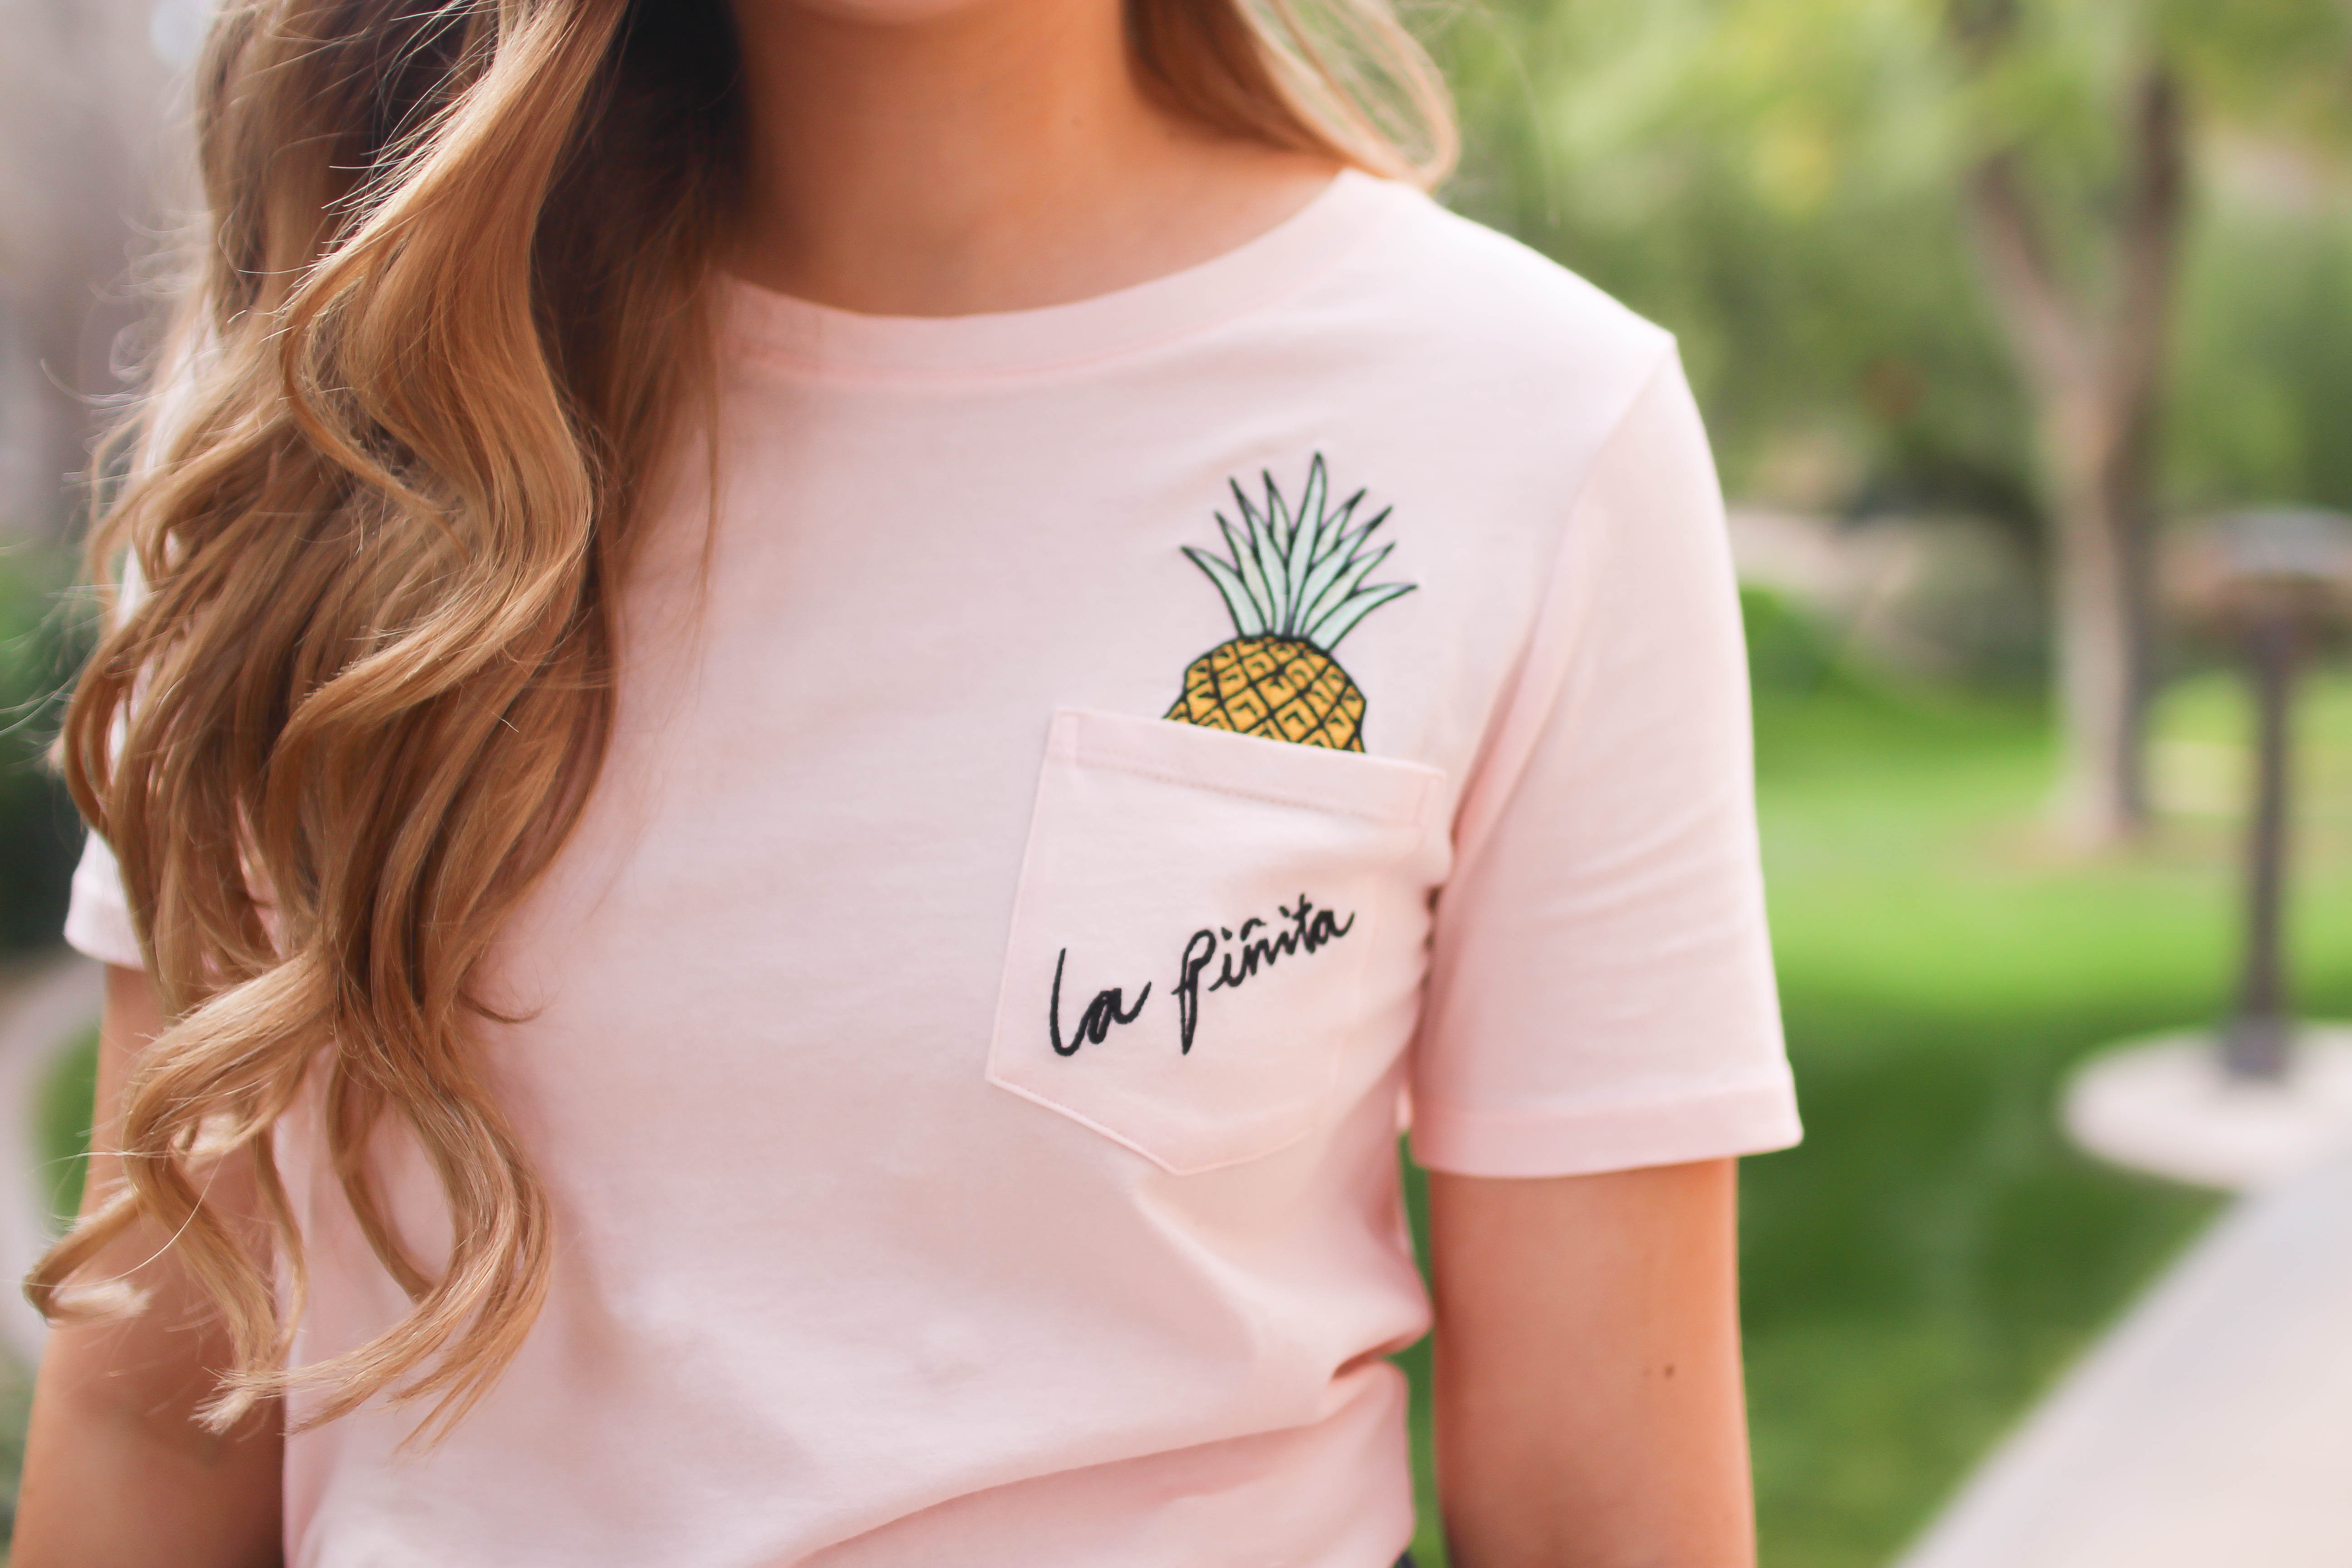 The cutest pink pineapple tee perfect for spring break and summer look! Perfect outfit idea for spring and summer! Paired with jean shorts and Gold New Balance shoes. By Lauren Lindmark on Daily Dose of Charm dailydoseofcharm.com